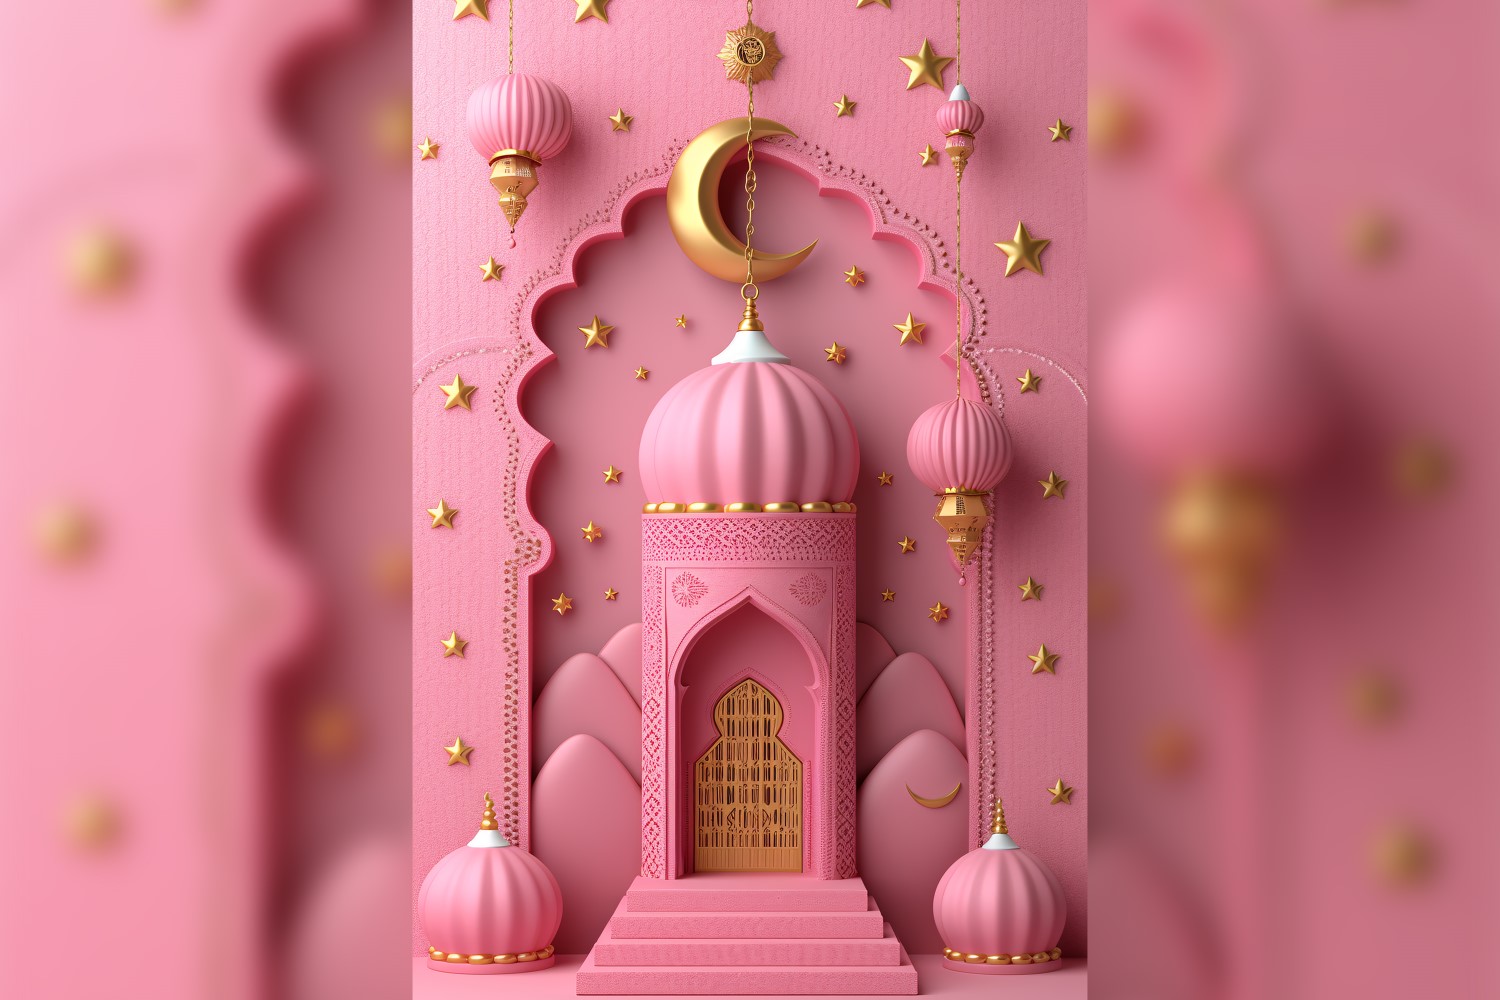 Ramadan Kareem greeting poster design with star and moon with mosque minar